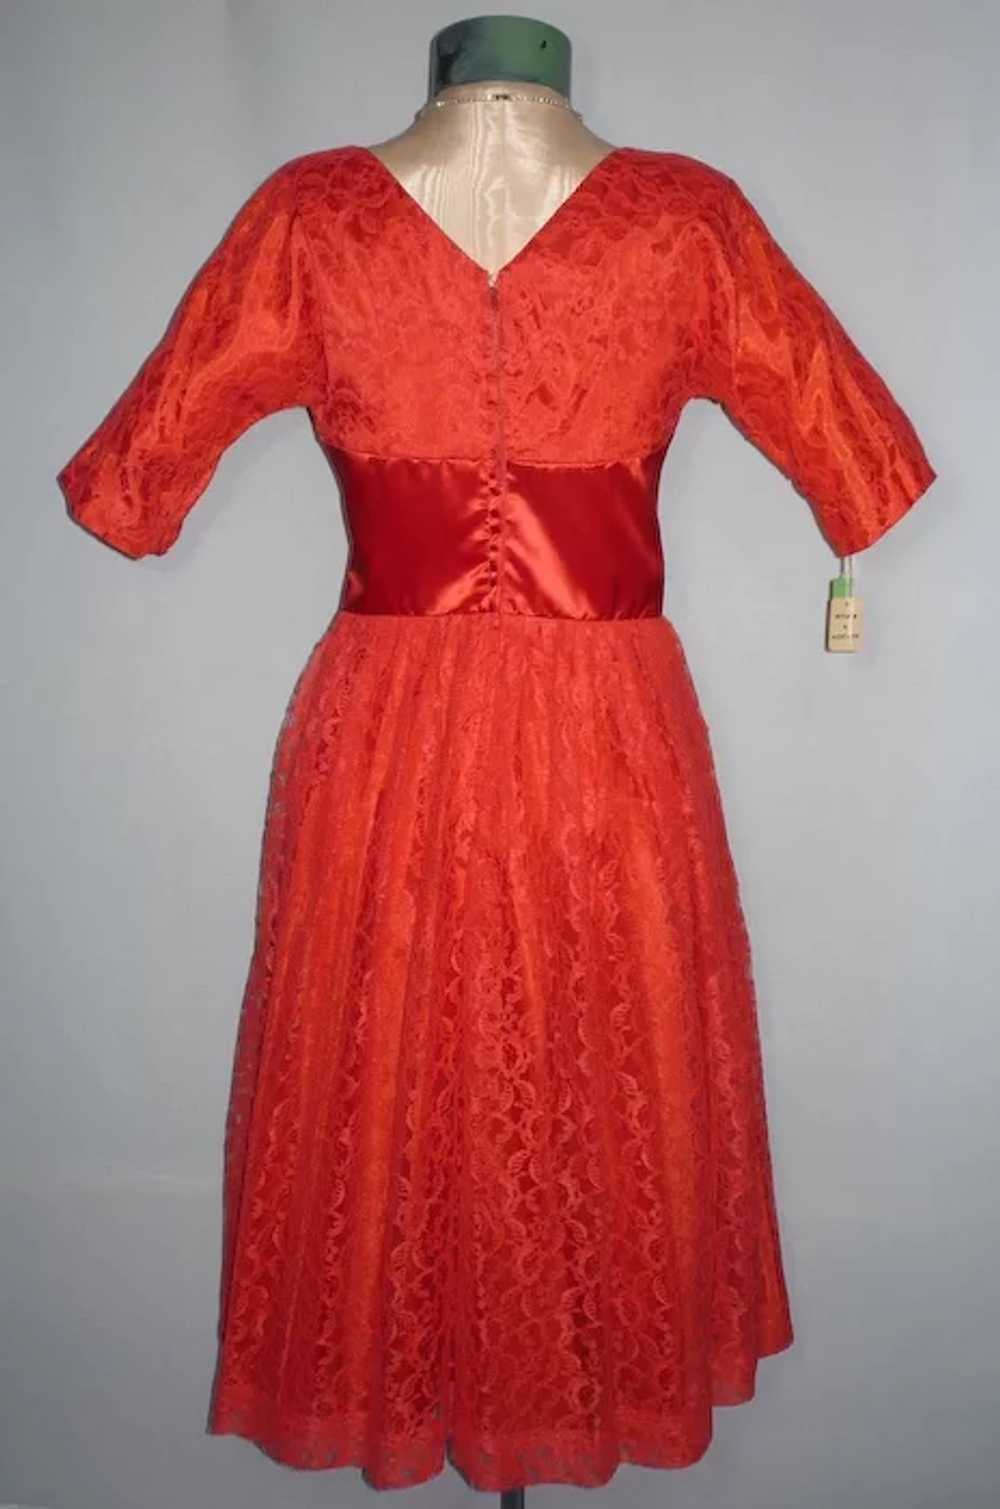 Vintage 1950s Red Chantilly Lace Party Dress - image 3